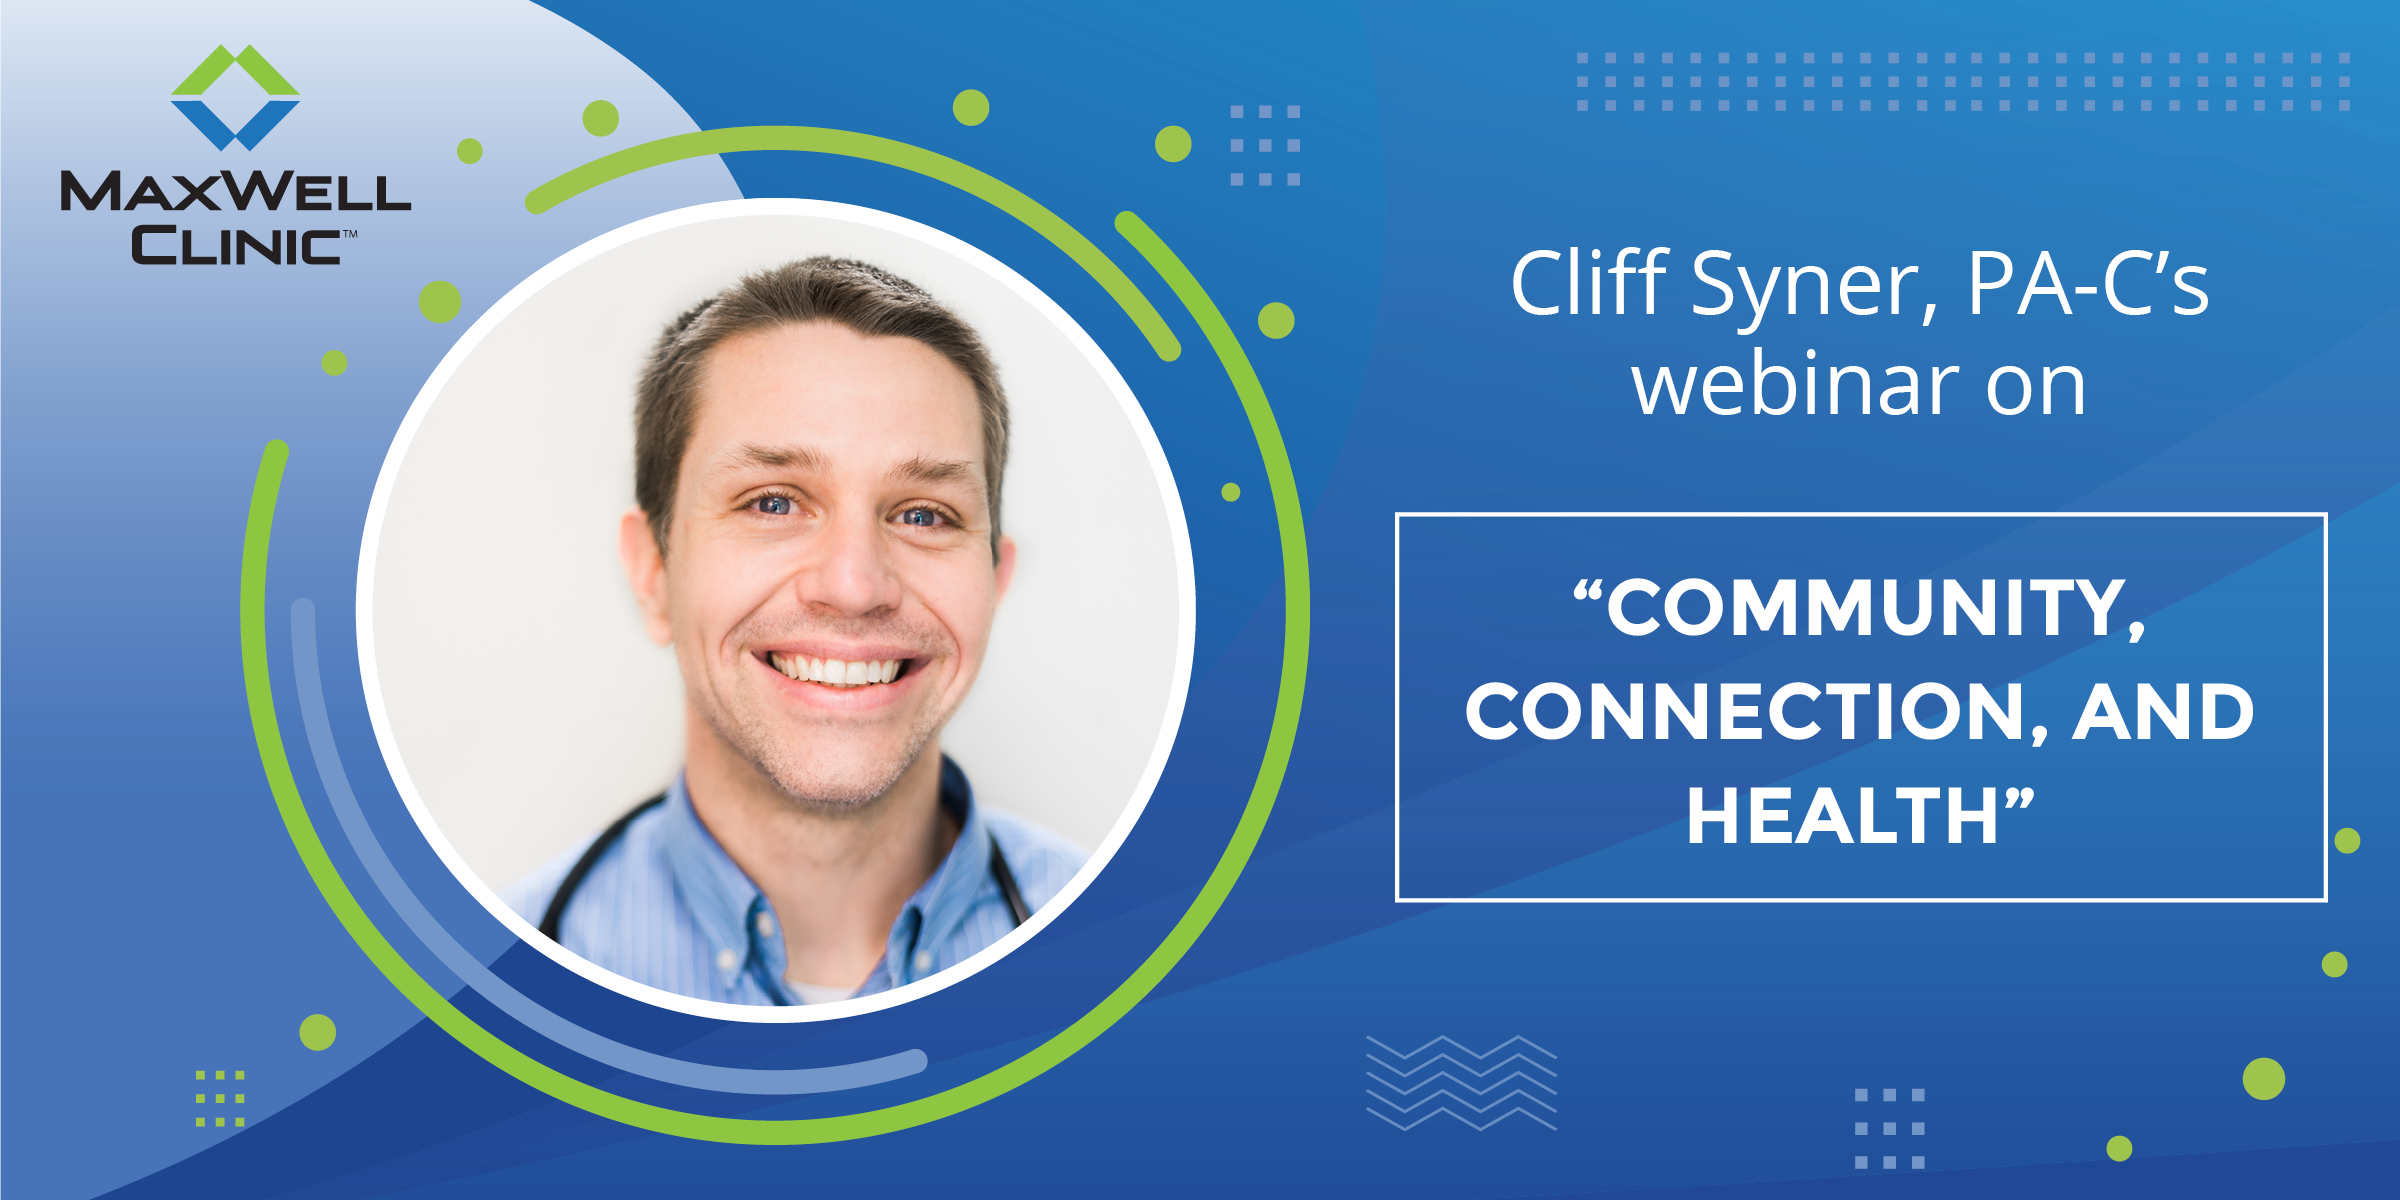 Community, Connection, and Health with Cliff Syner, PA-C